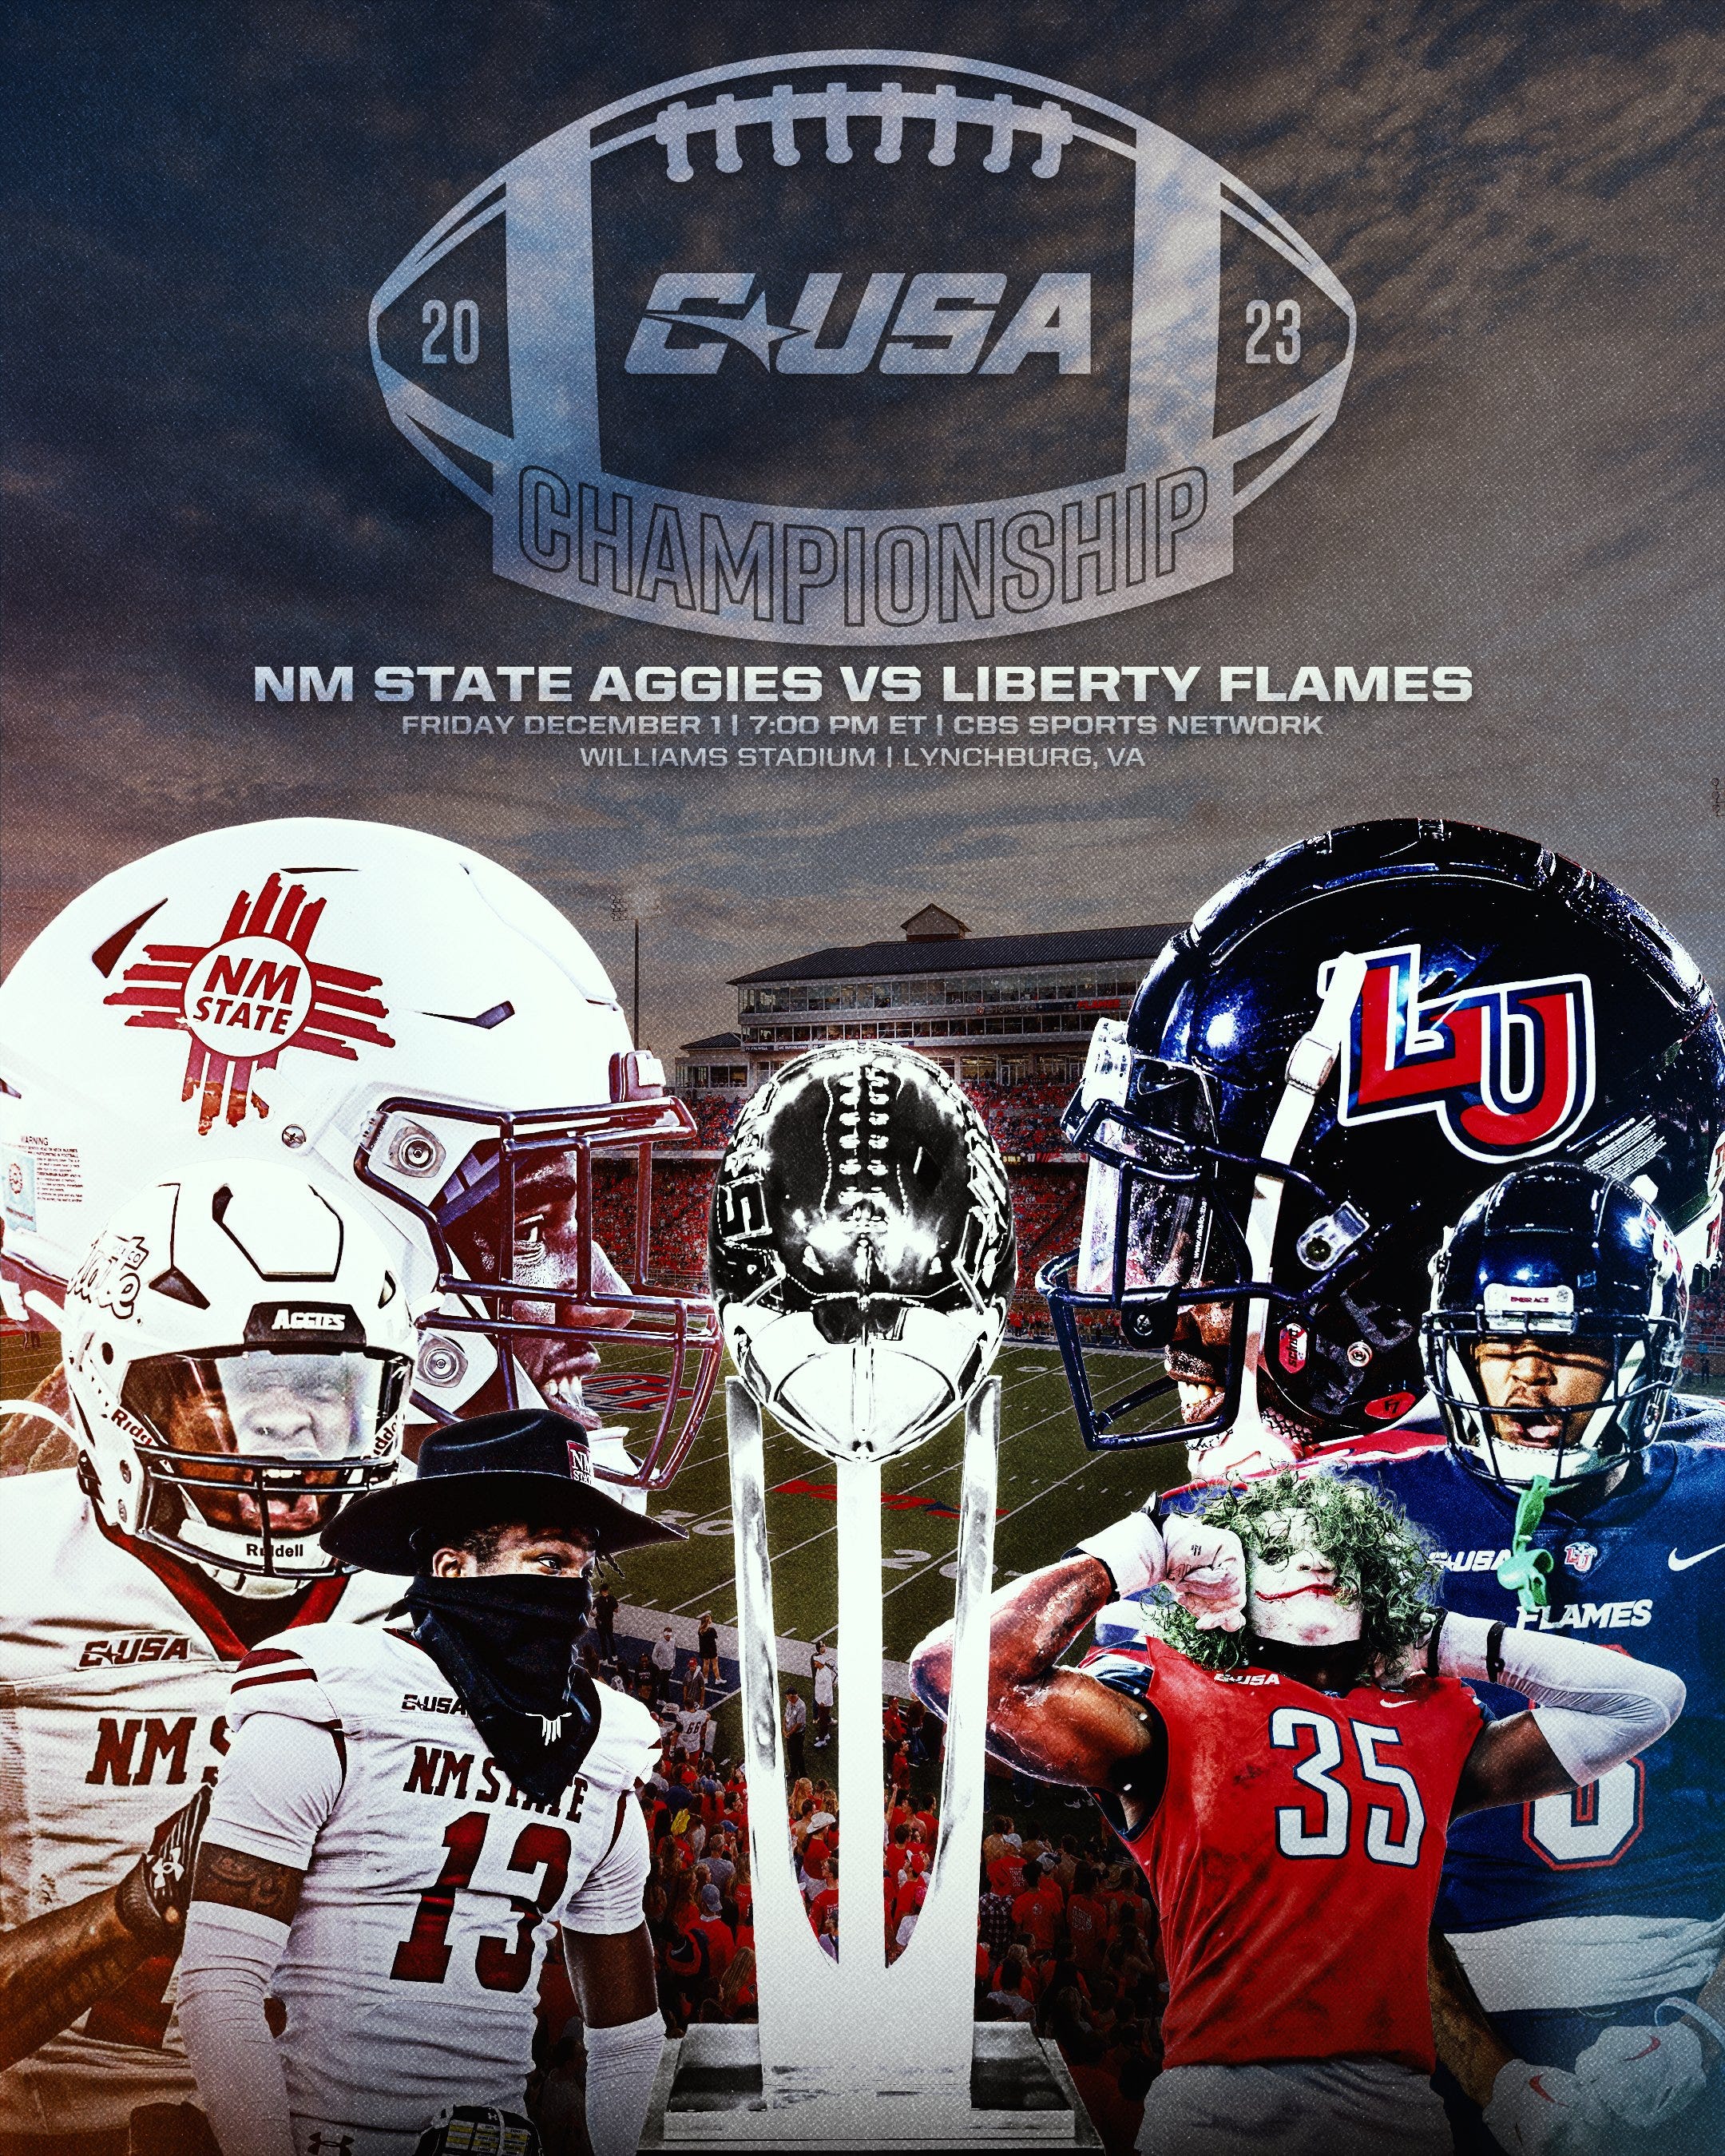 (For Paid Subscribers) The World's Biggest NMSU vs Liberty Preview